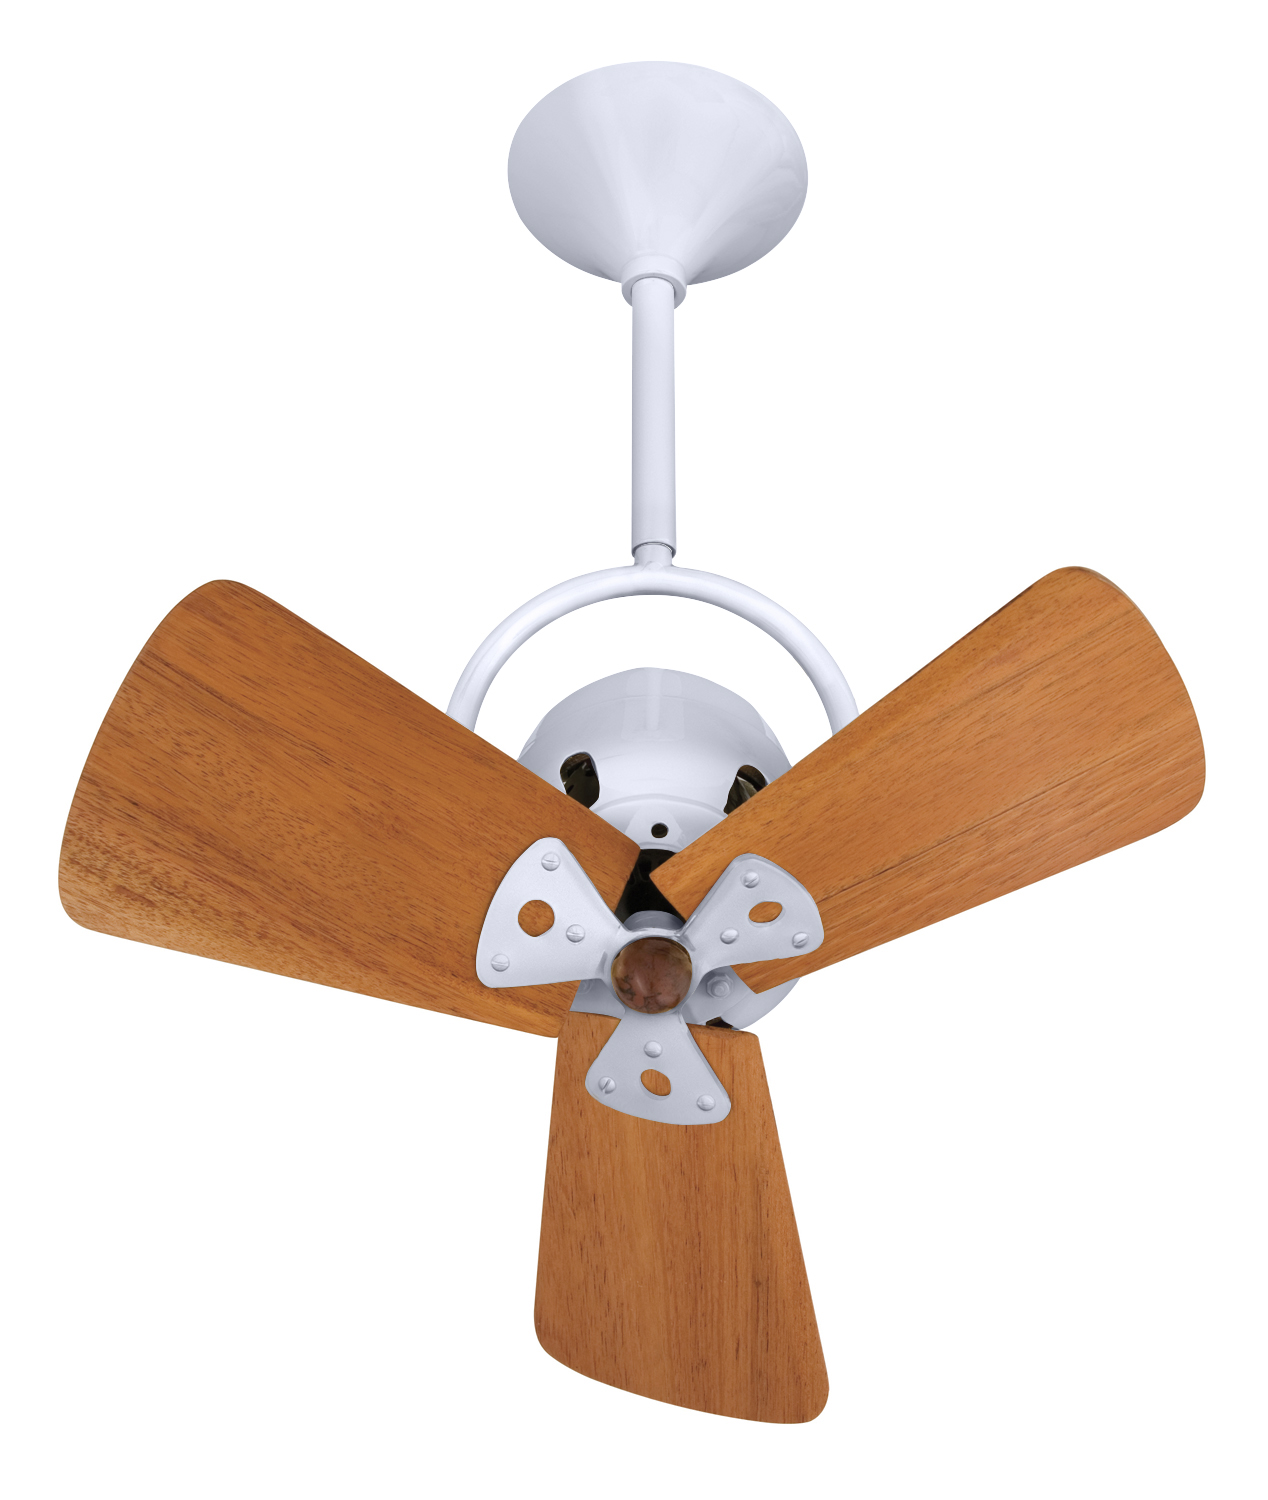 Bianca Direcional ceiling fan in gloss white with Mahogany wood blades made by Matthews Fan Company.